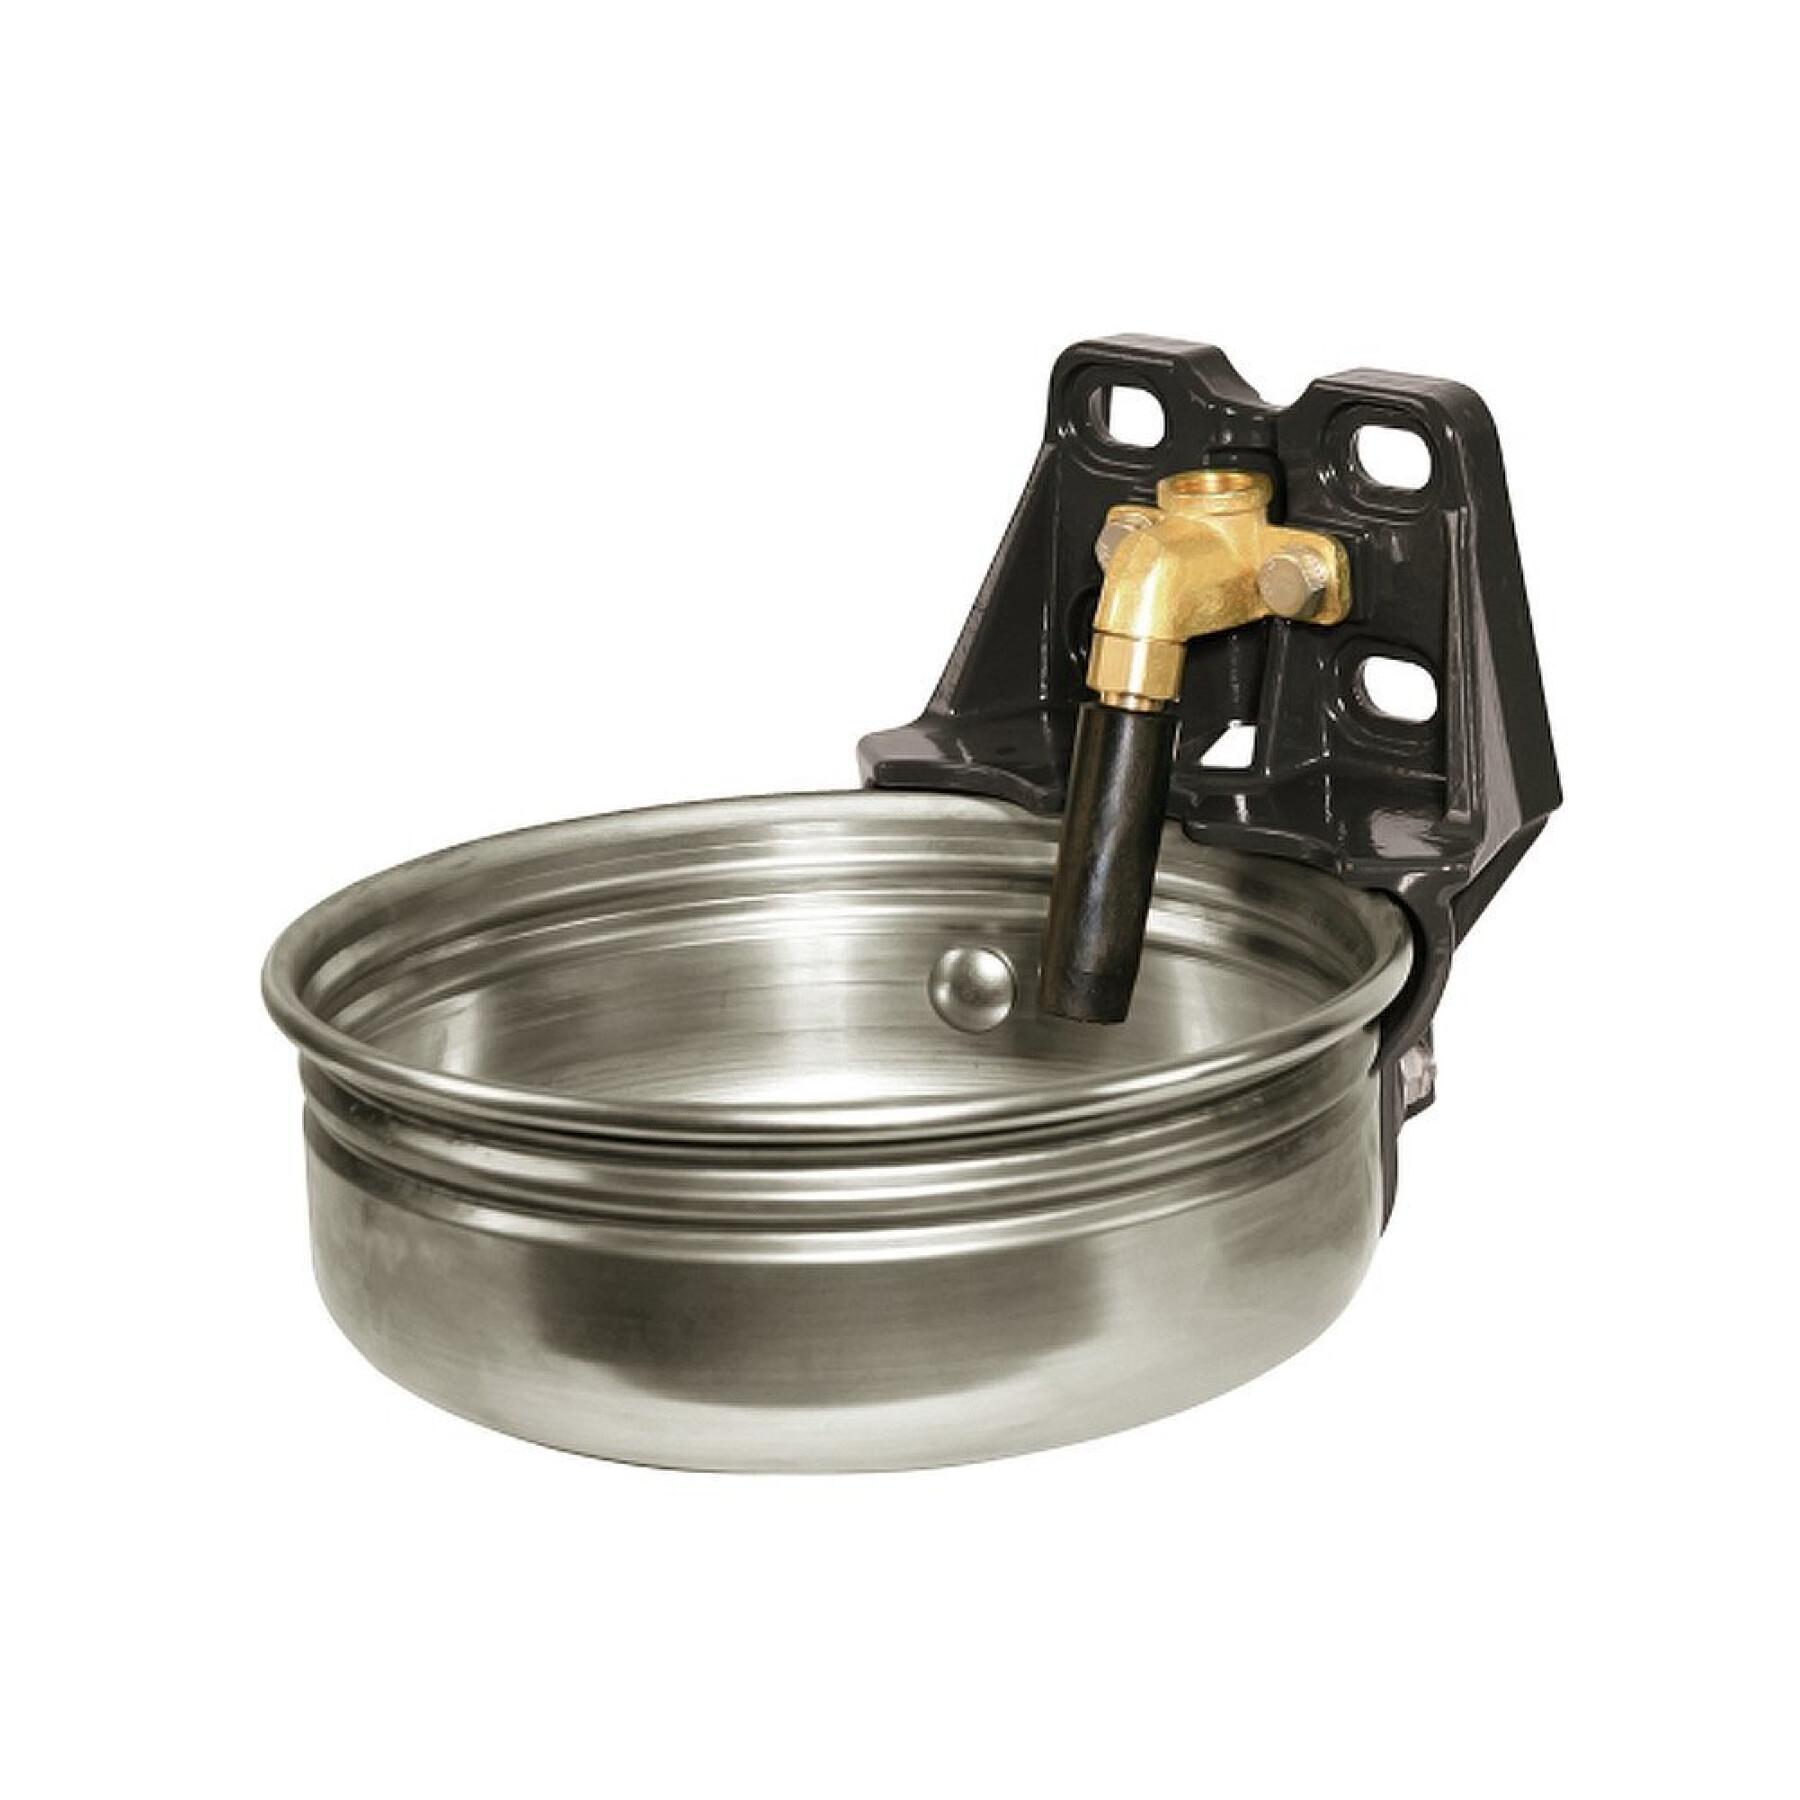 Stainless steel drinking trough with 1/2" connection Kerbl E21